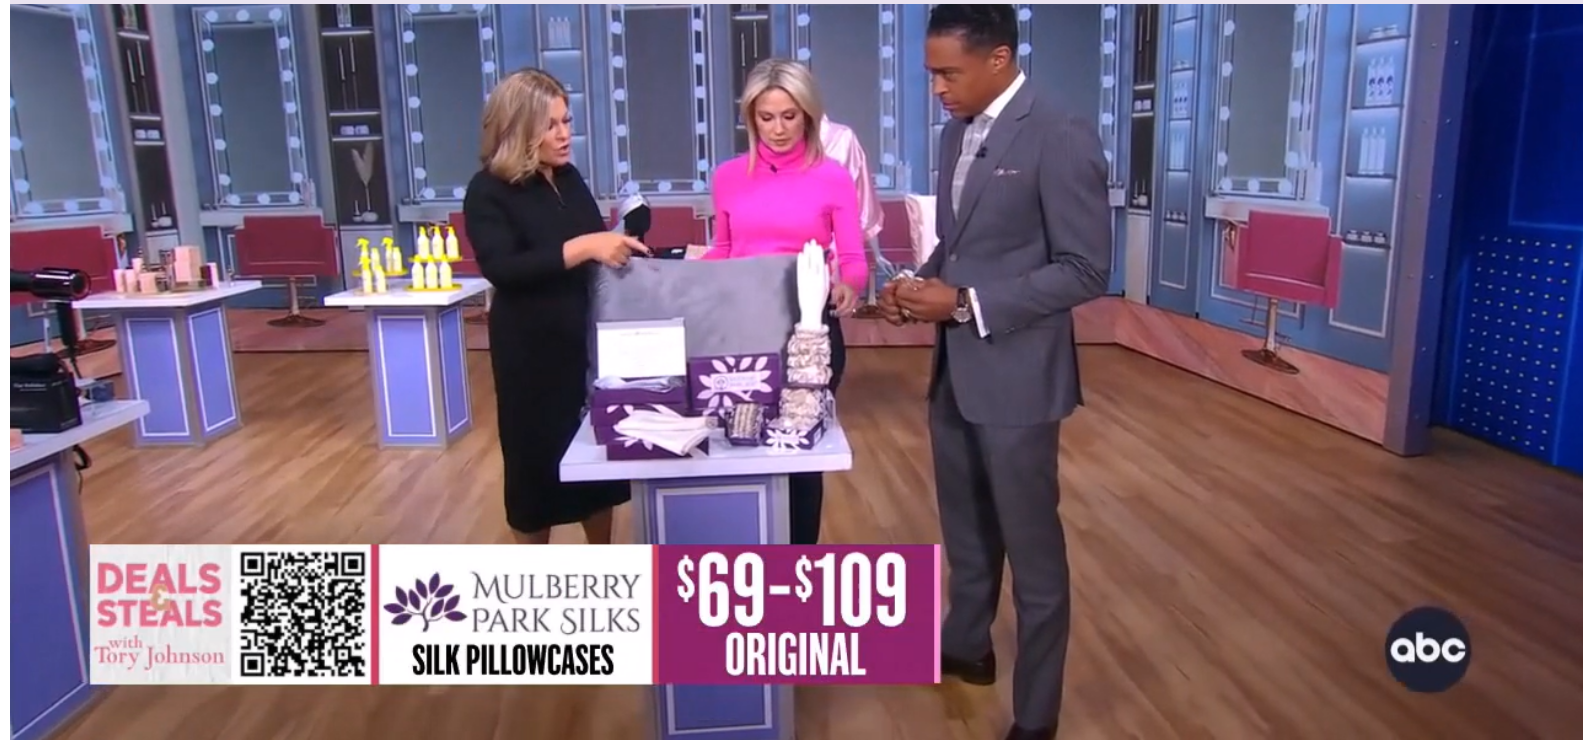 Mulberry Park Silks featured on Good Morning America